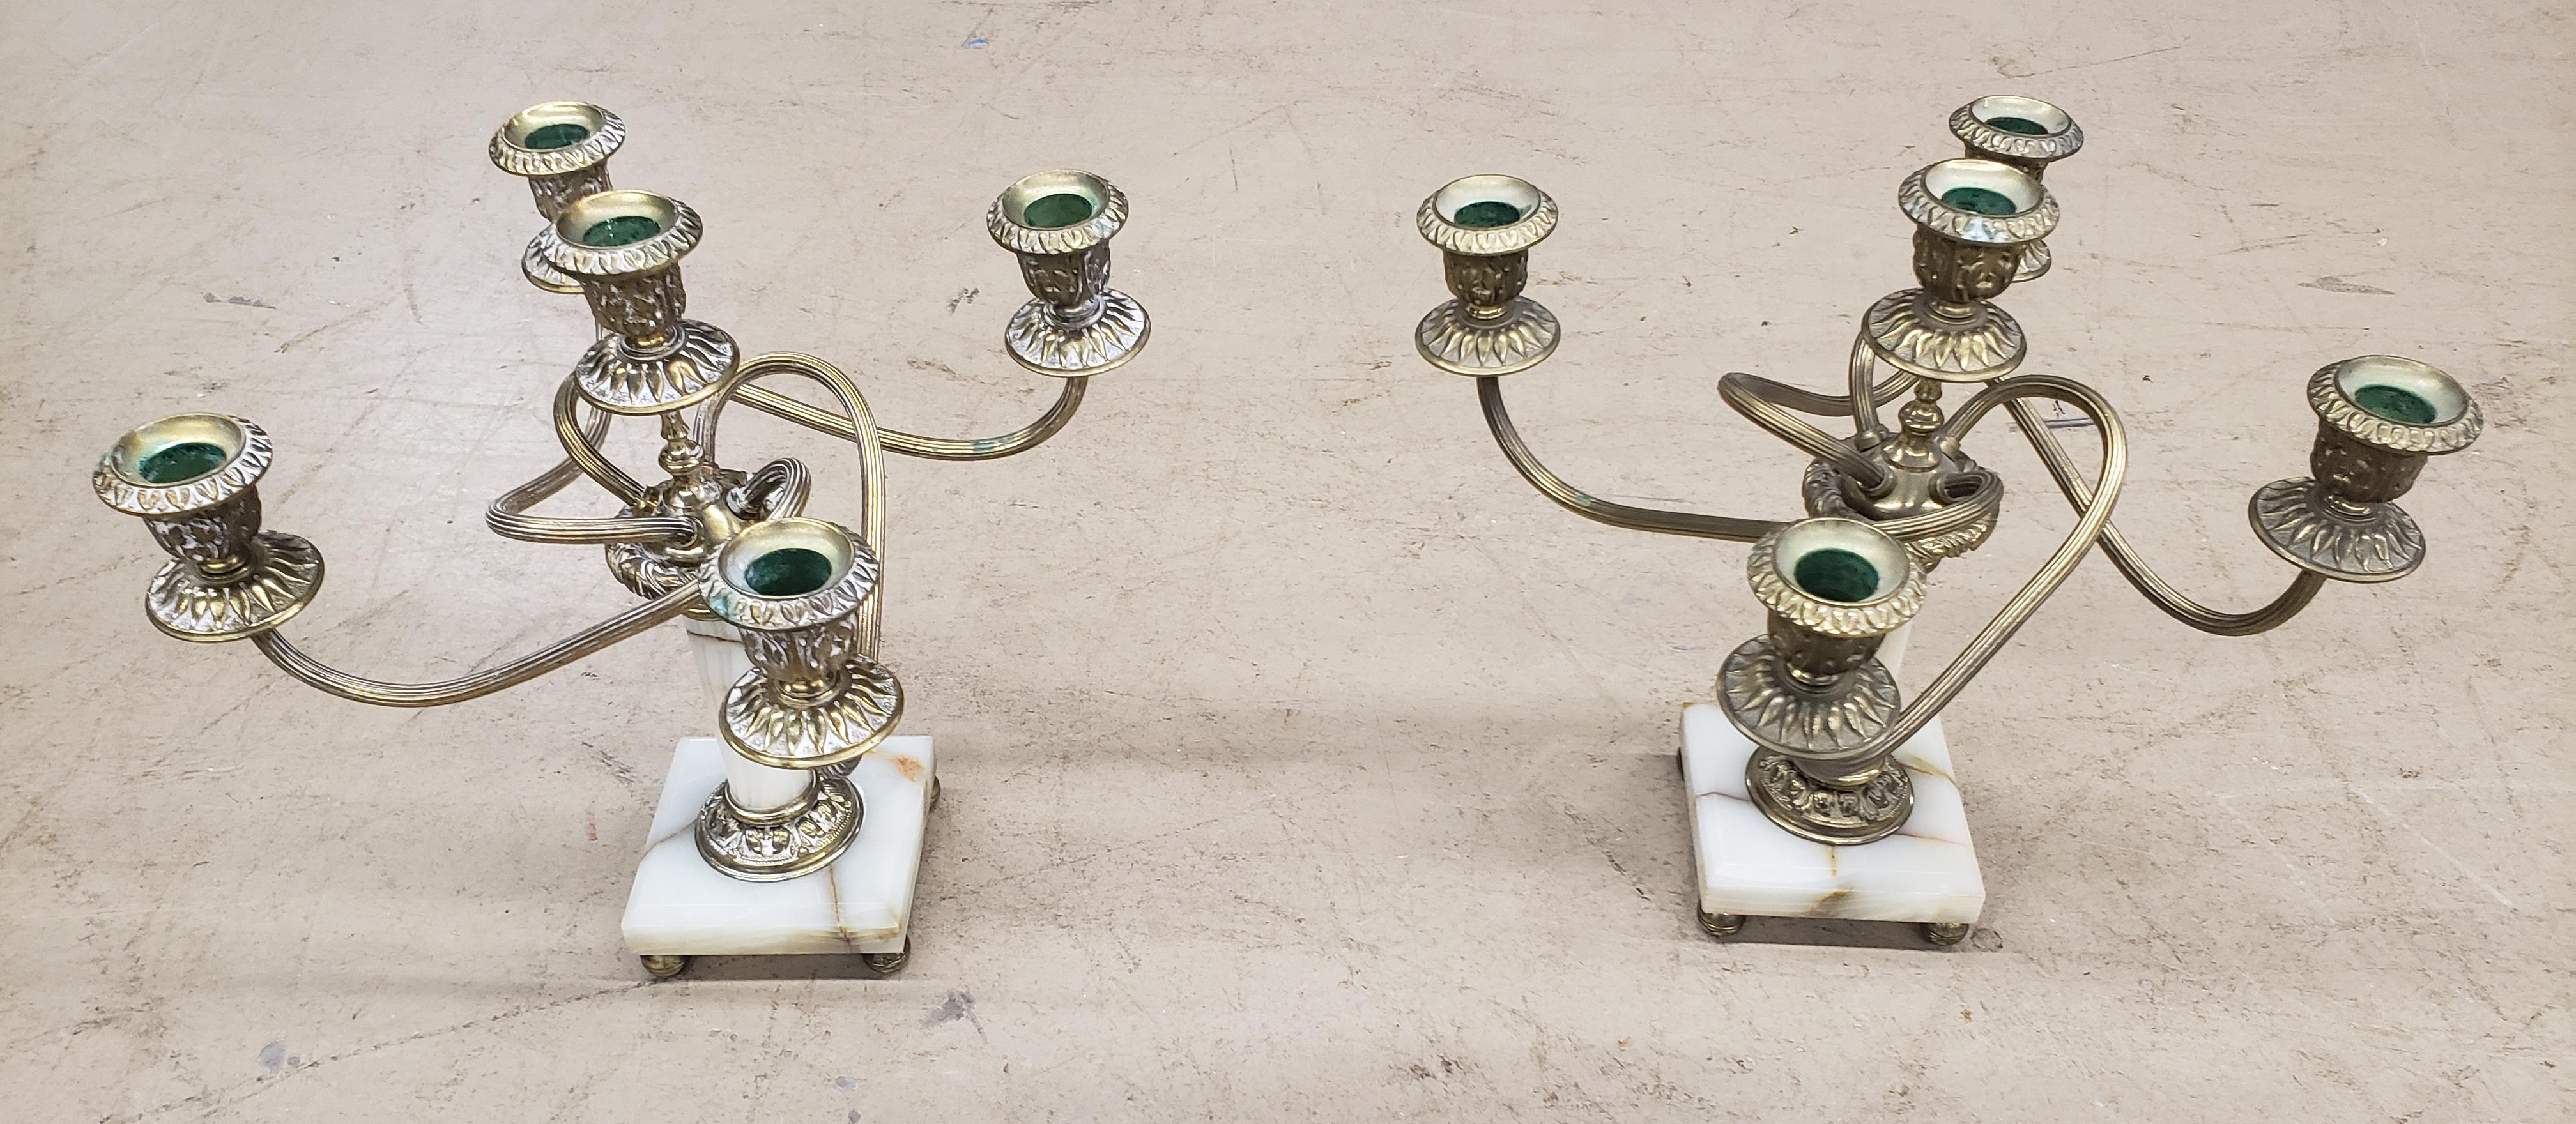 A unique pair of Italian patinated brass and onyx candleholders in
Good vintage condition.Measure 11